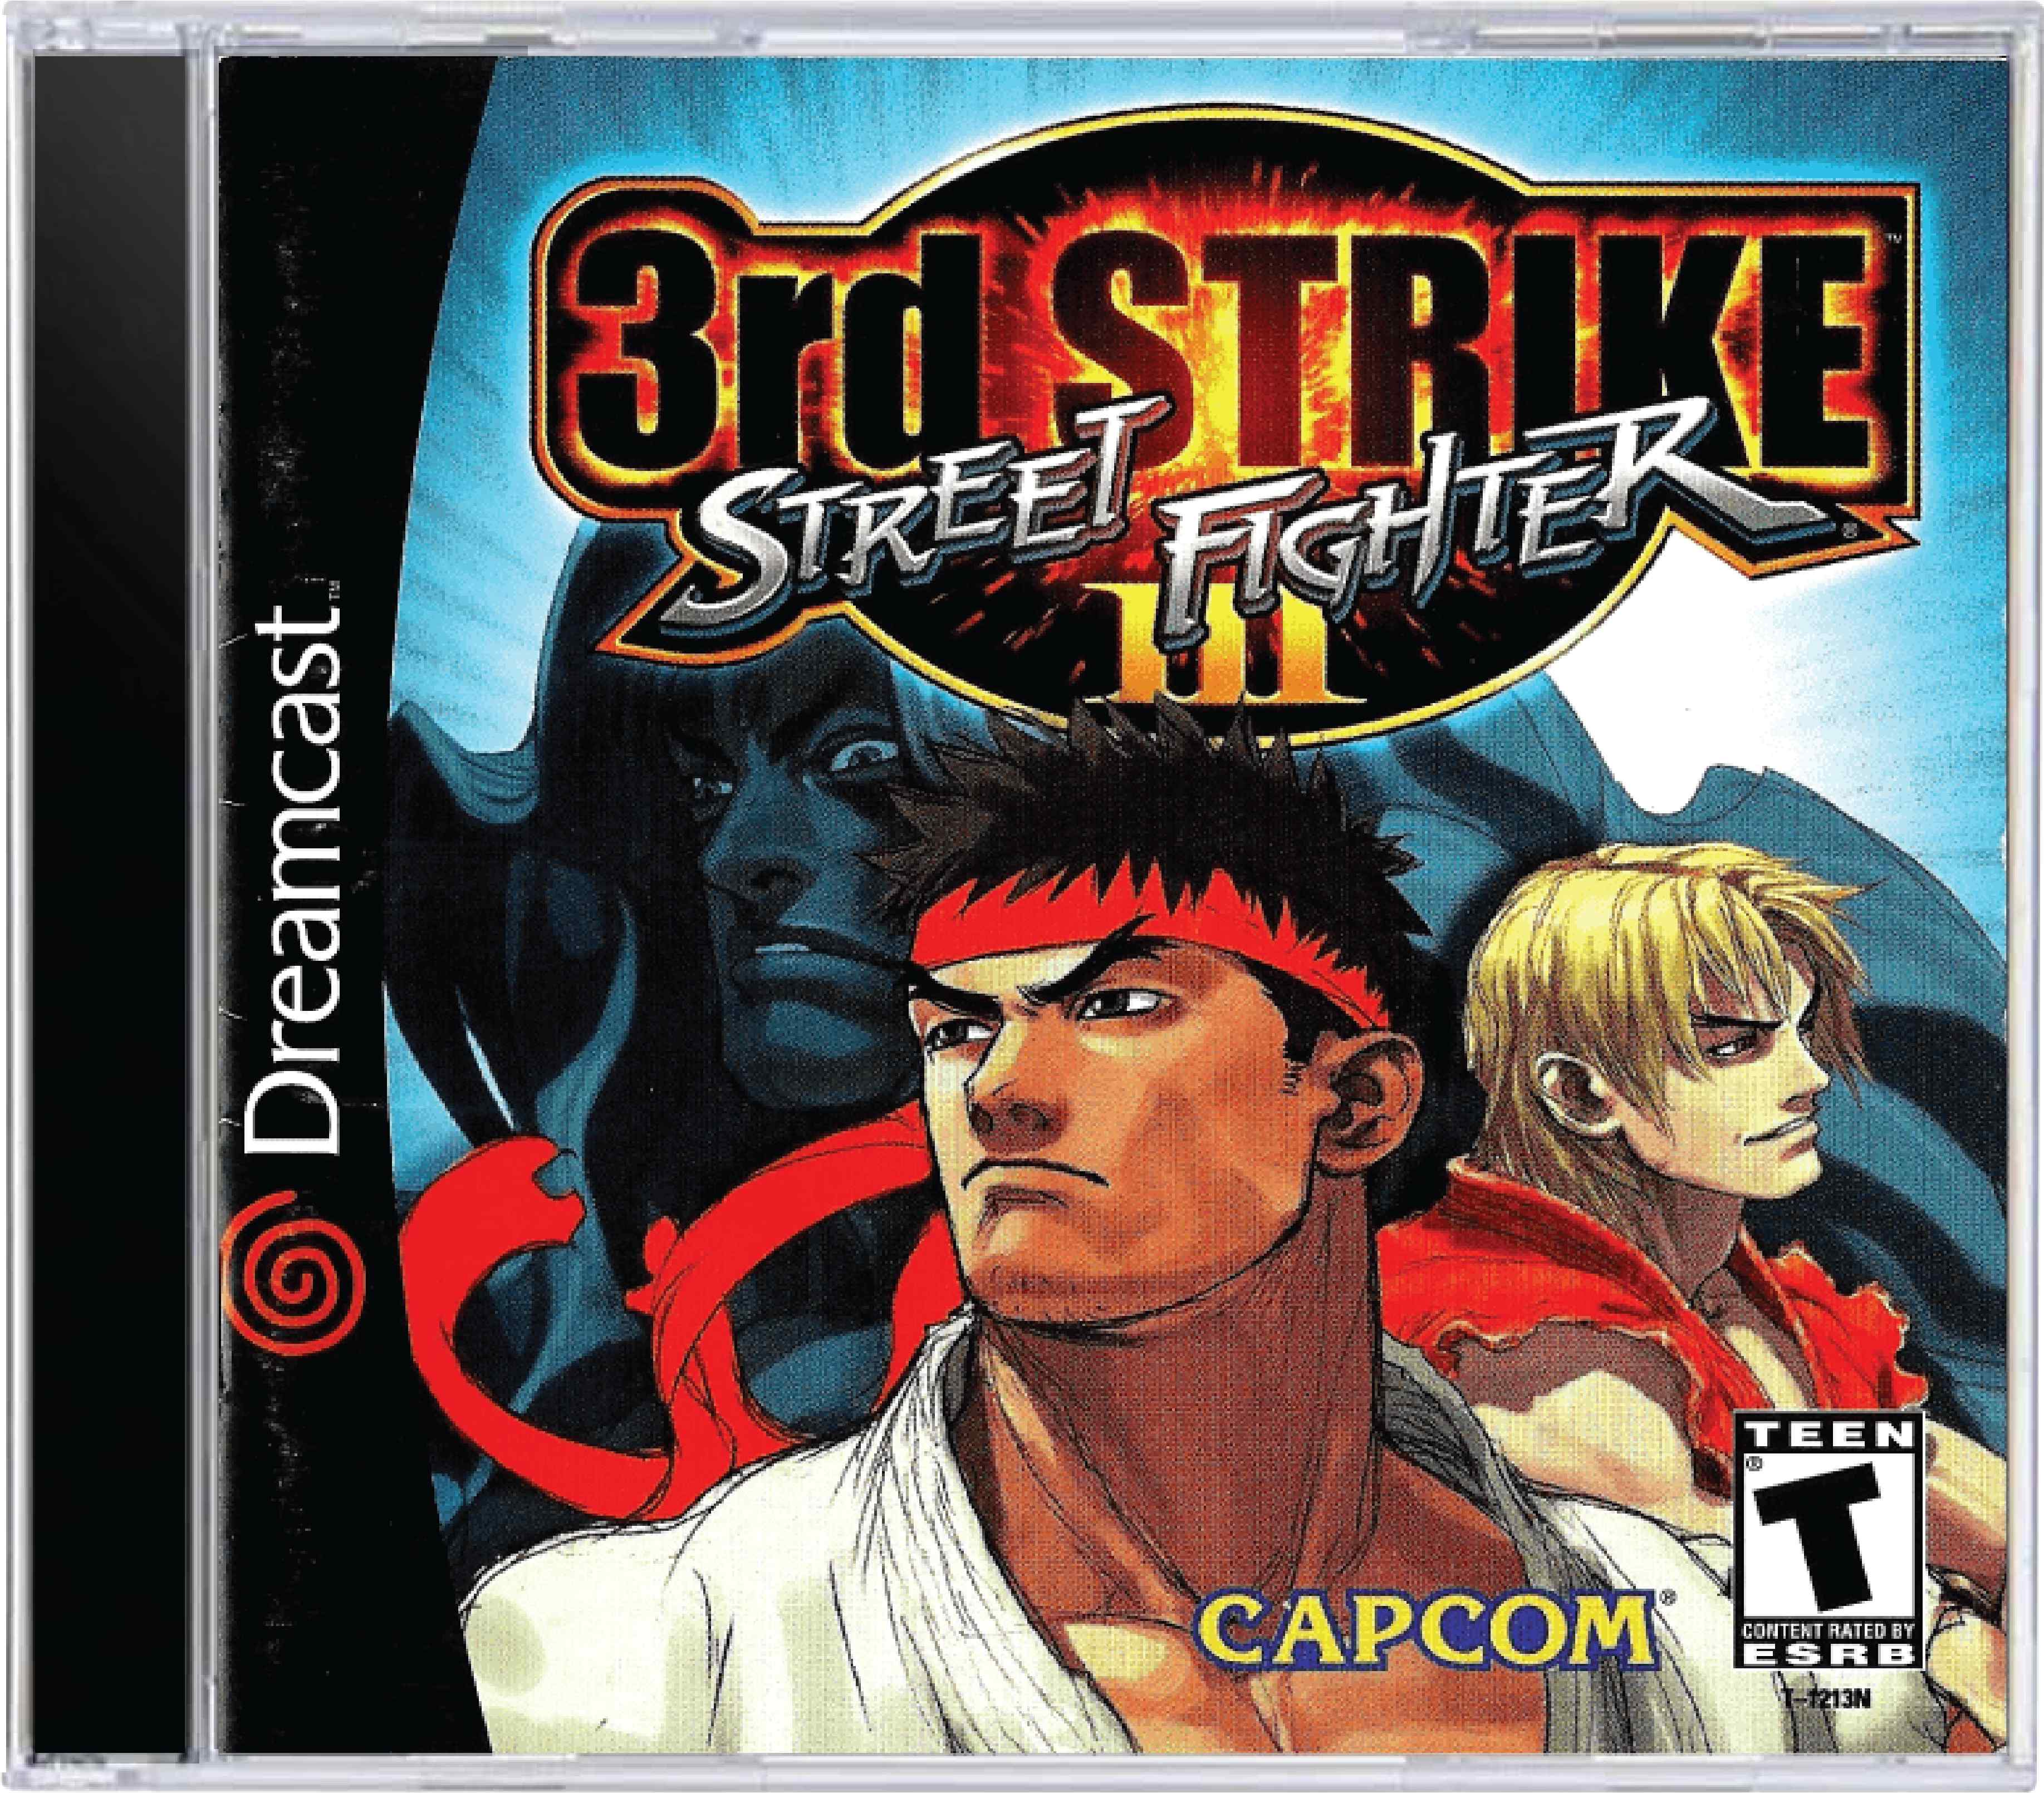 Street Fighter III 3rd Strike Fight for the Future Cover Art